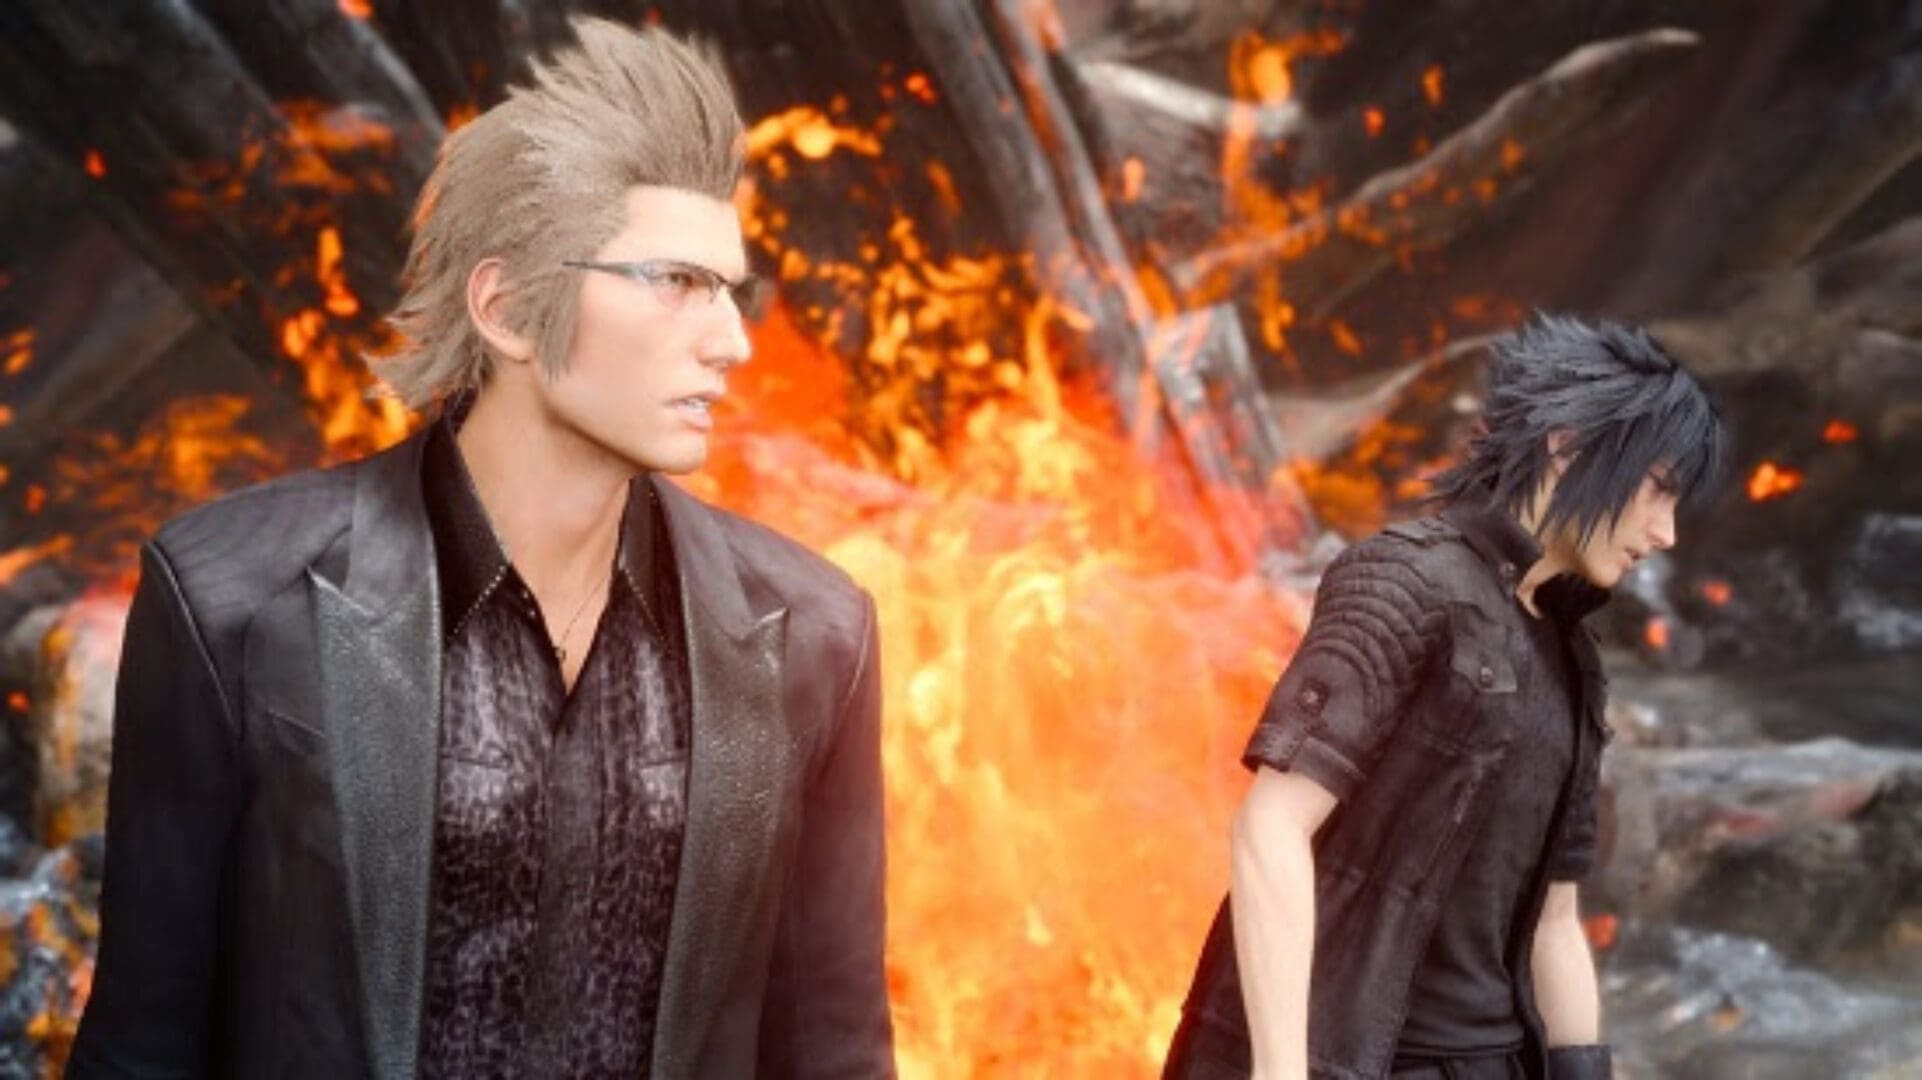 Final Fantasy XV – New Story Trailer from Tokyo Game Show 2016